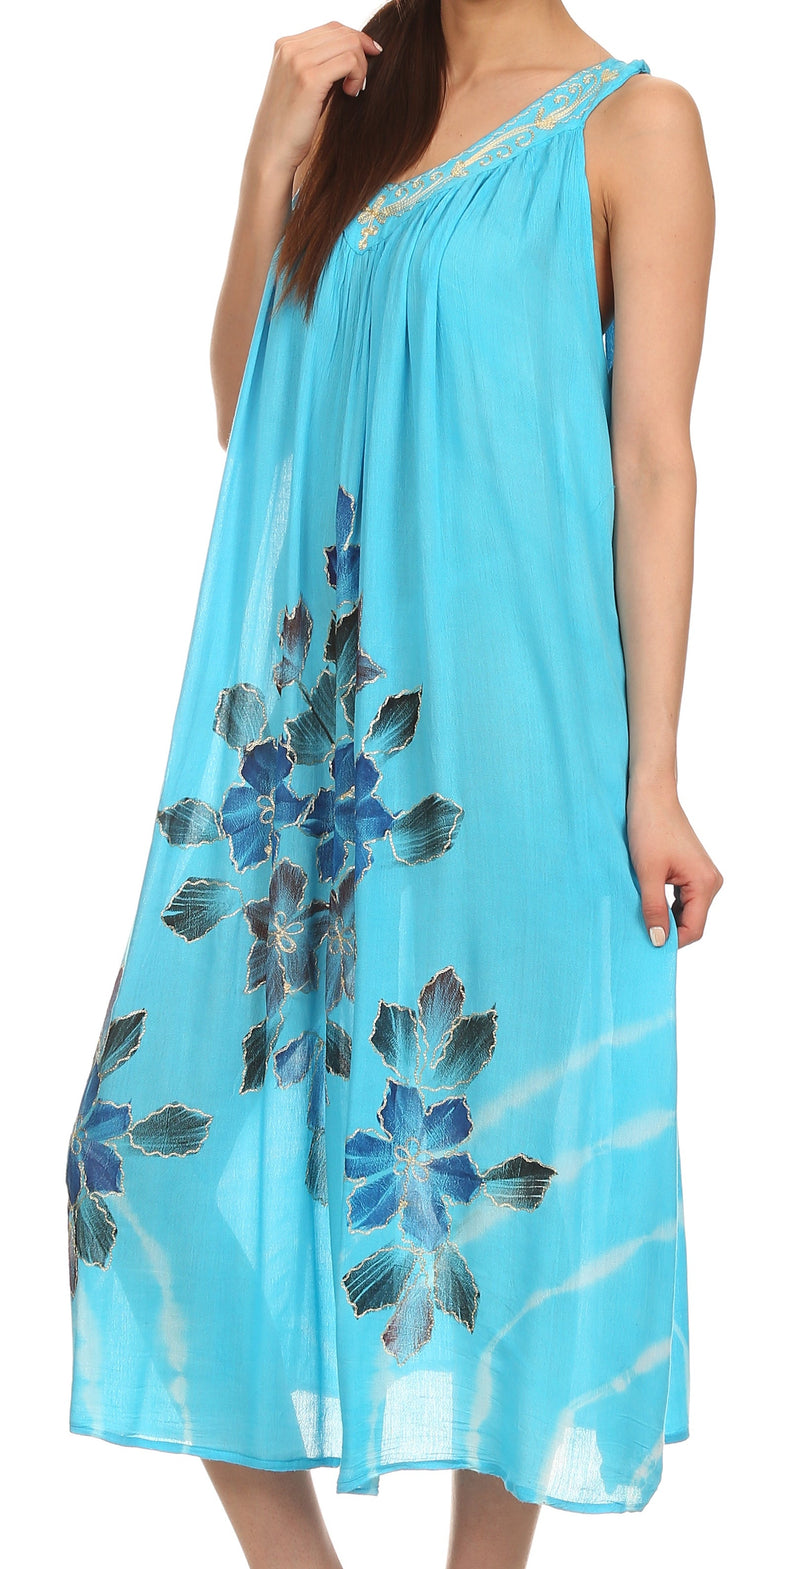 Sakkas Kira Embroidered Relaxed Fit with Pockets Tank Dress / Cover Up